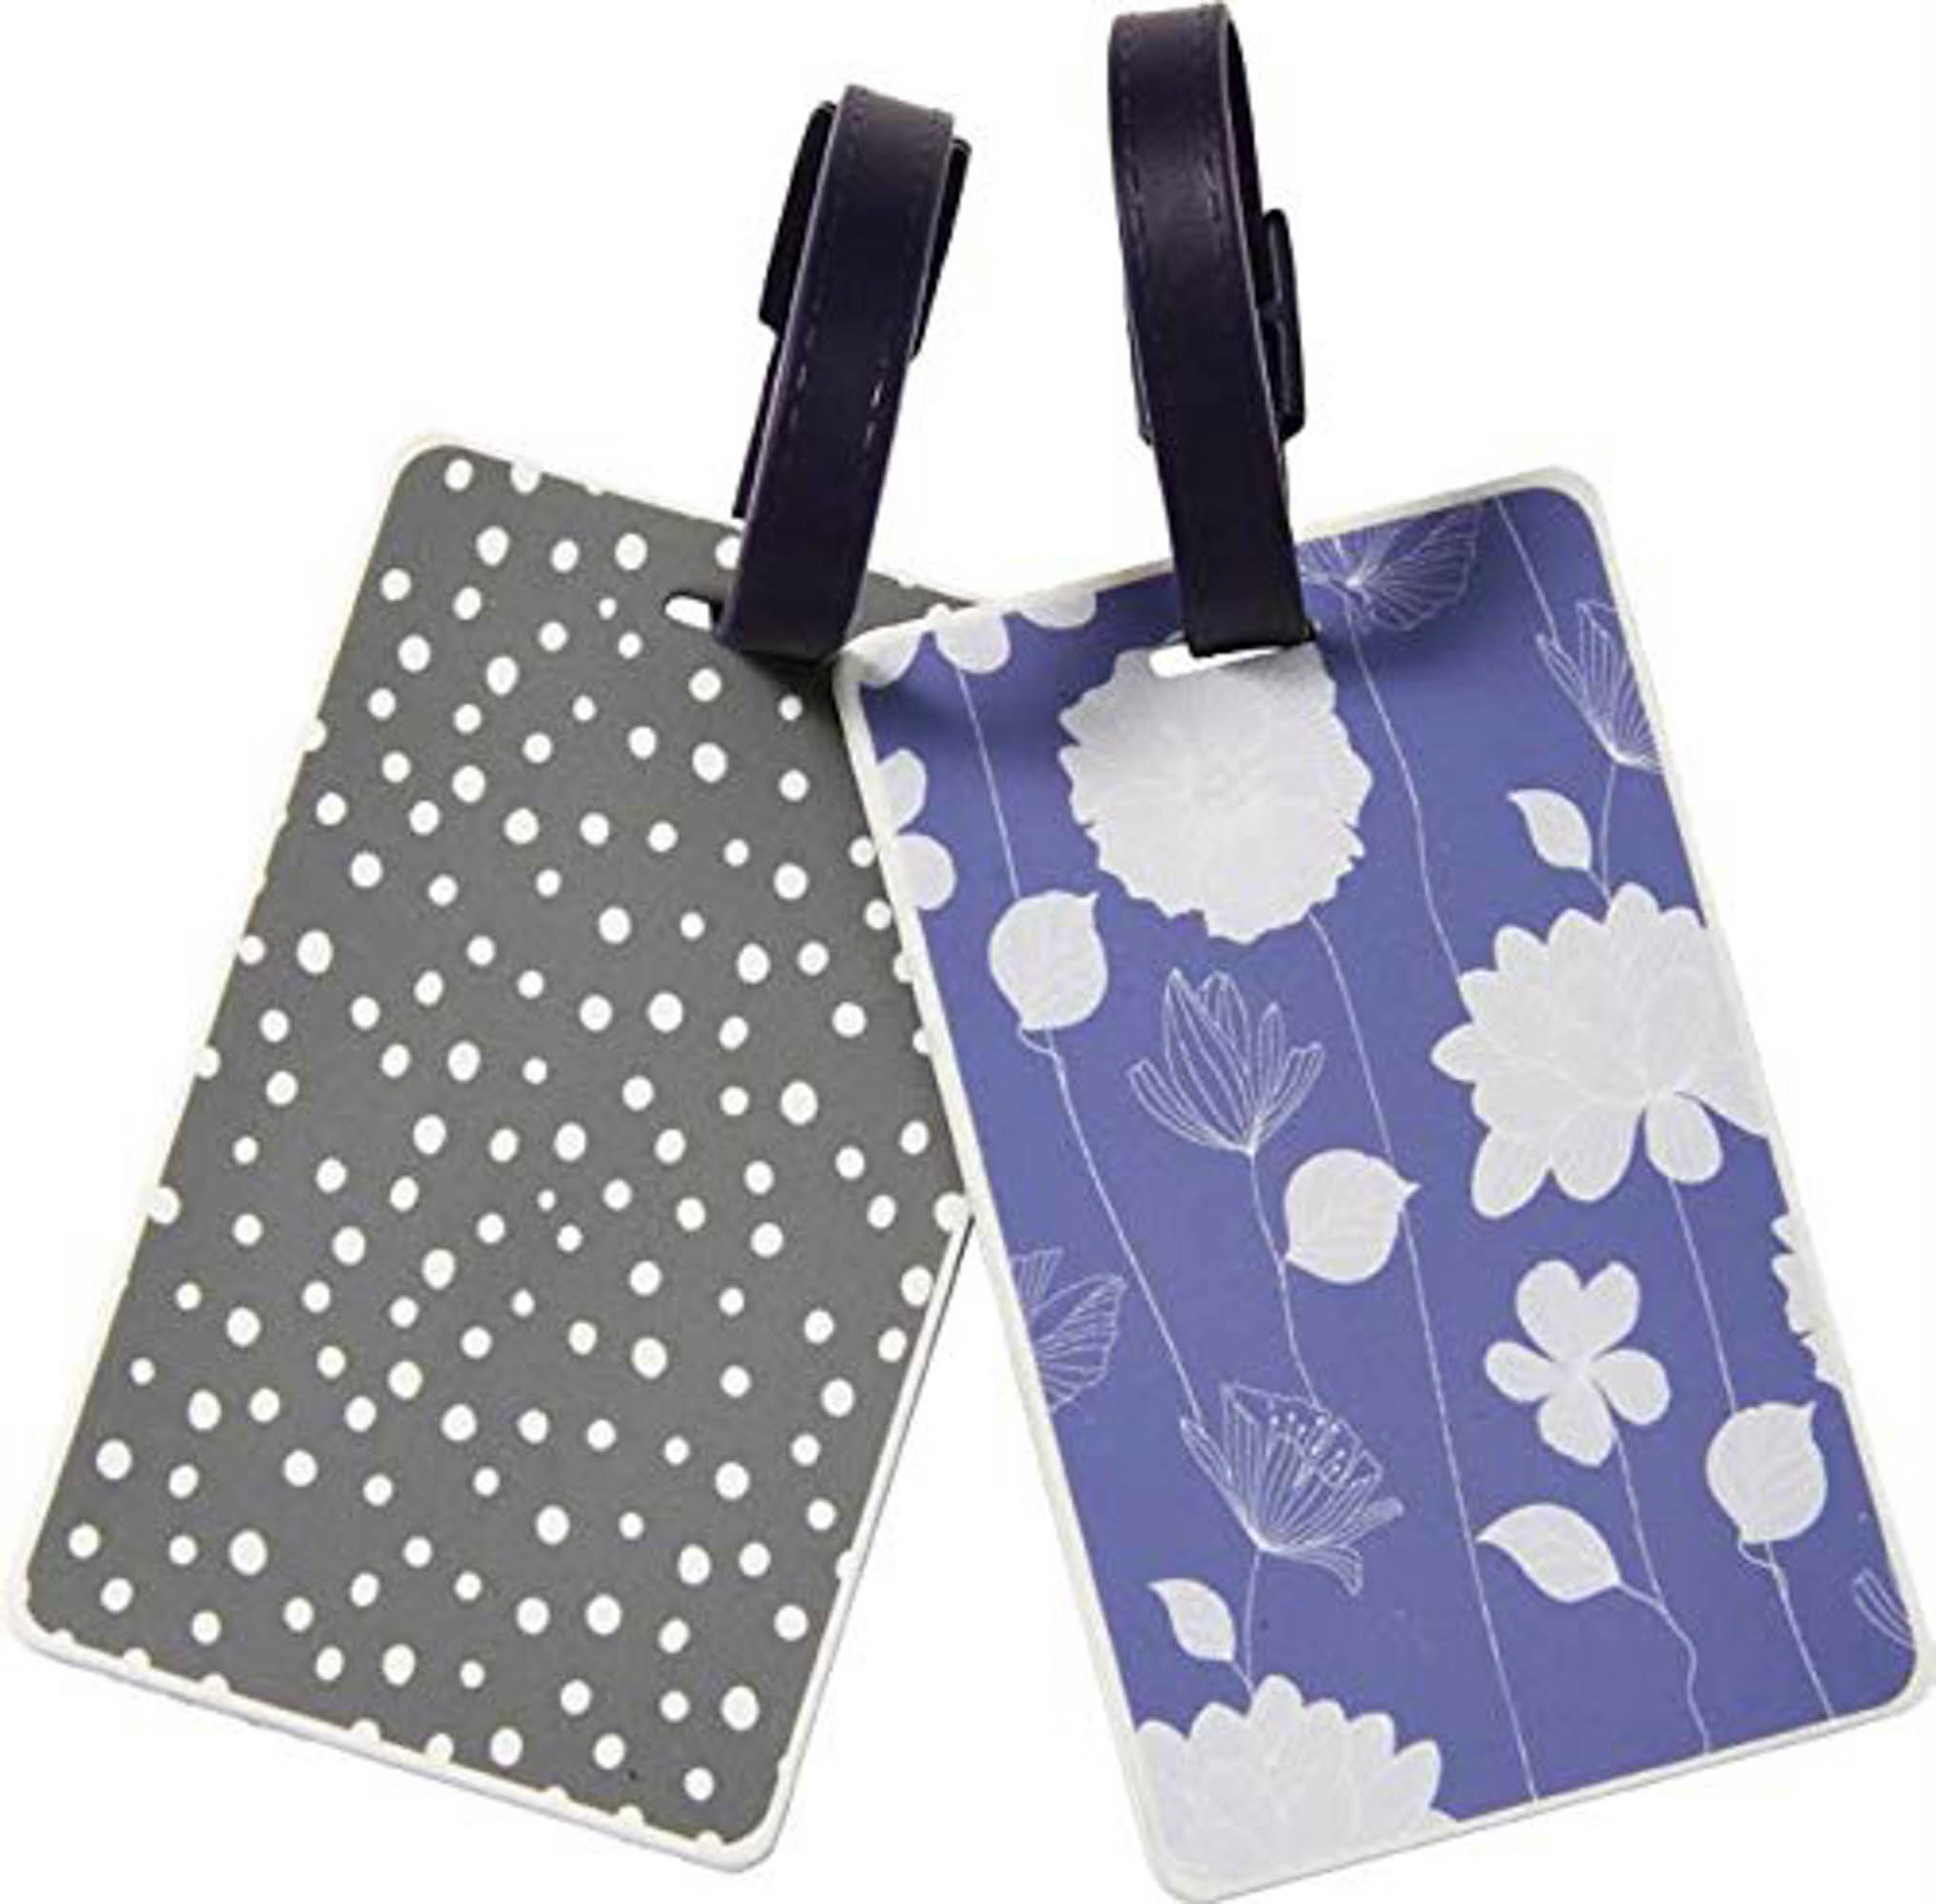 Whales Pattern Baggage Tag For Travel Tags Accessories 2 Pack Luggage Tags